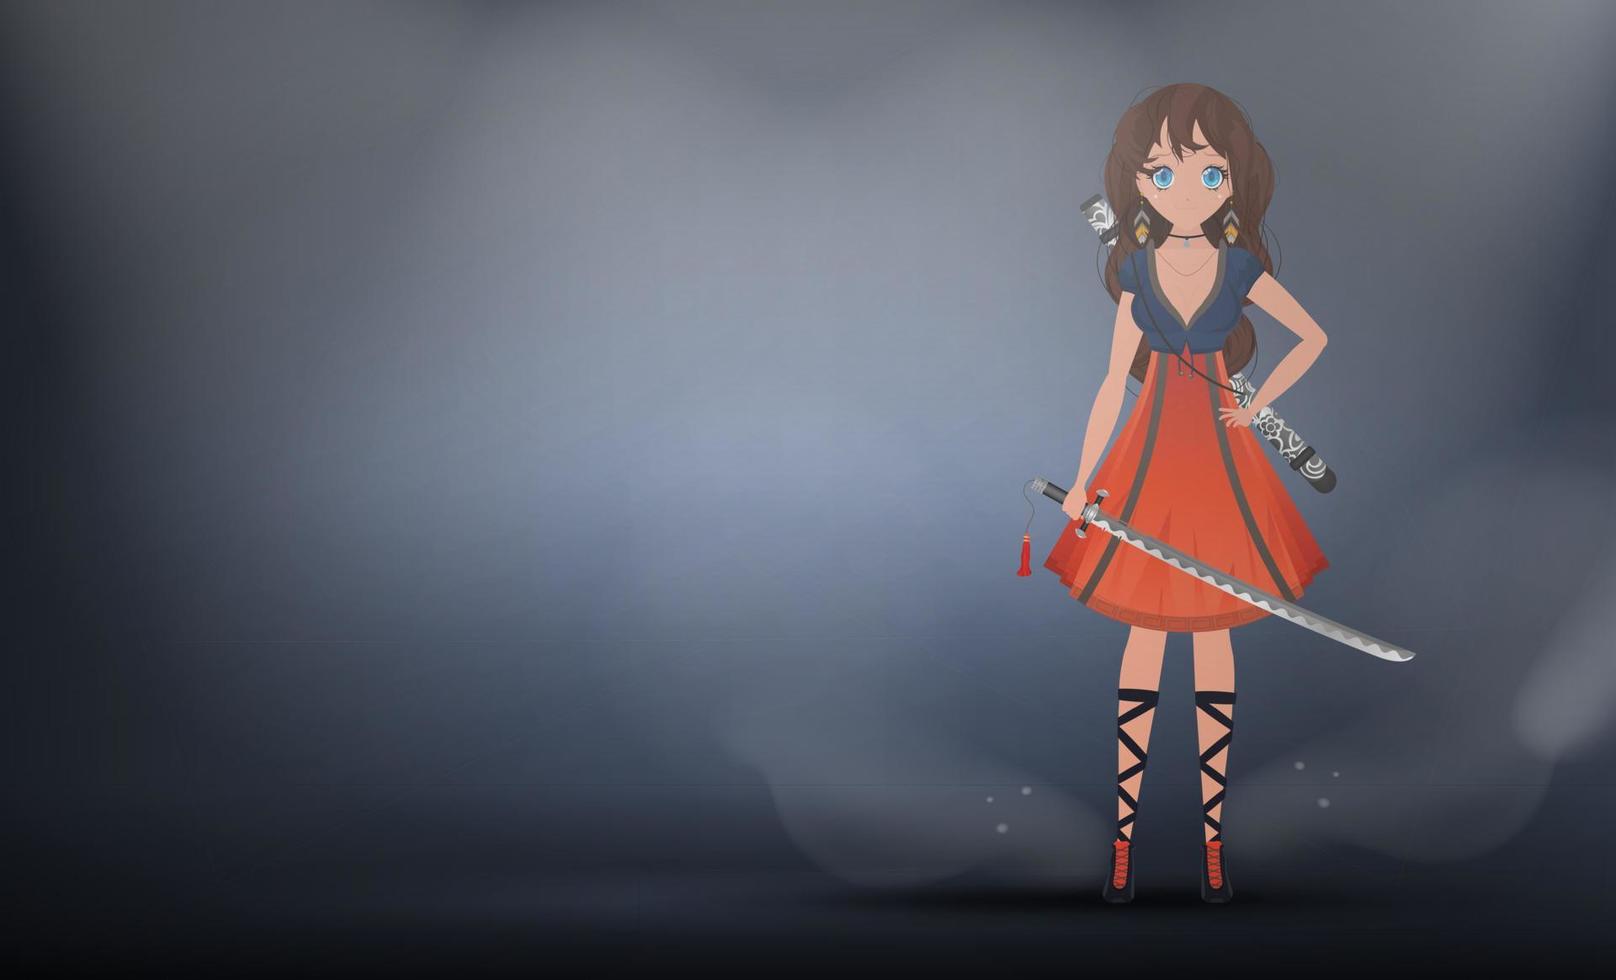 Girl with a katana in a blue and red dress. Anime samurai woman on studio gray background. Cartoon style, vector illustration.